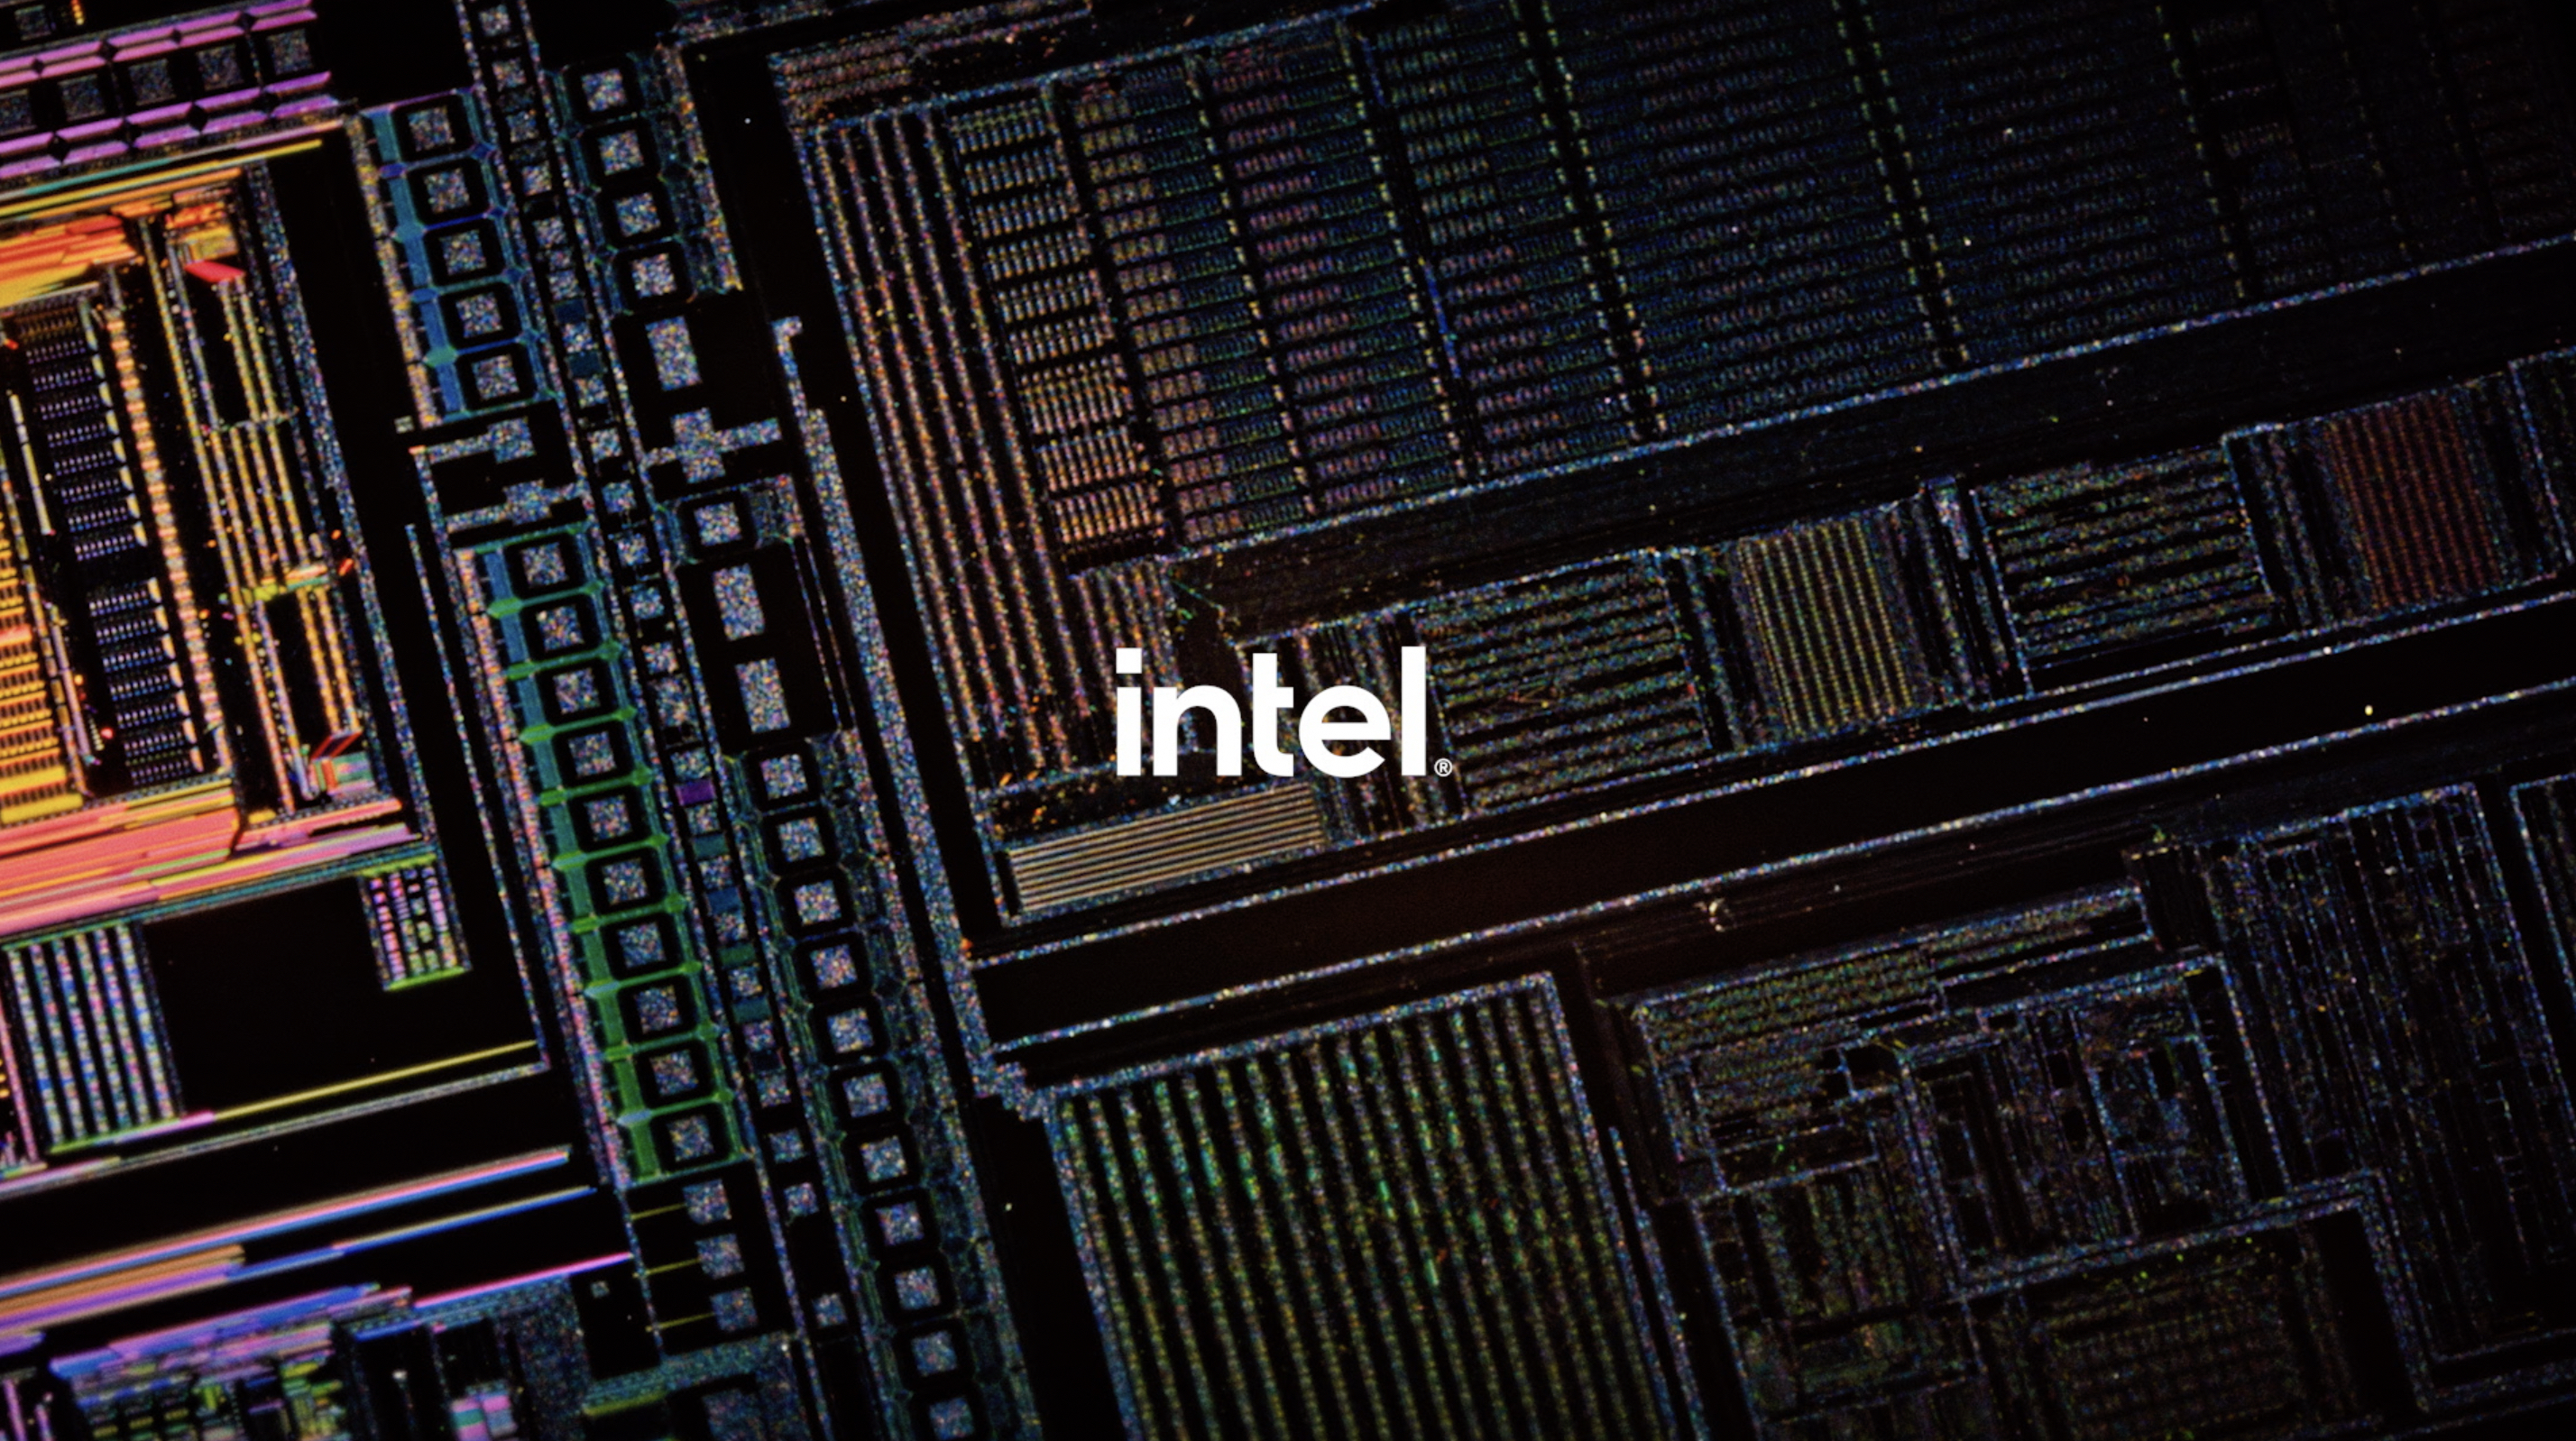 Intel Company Overview and Future of Technology